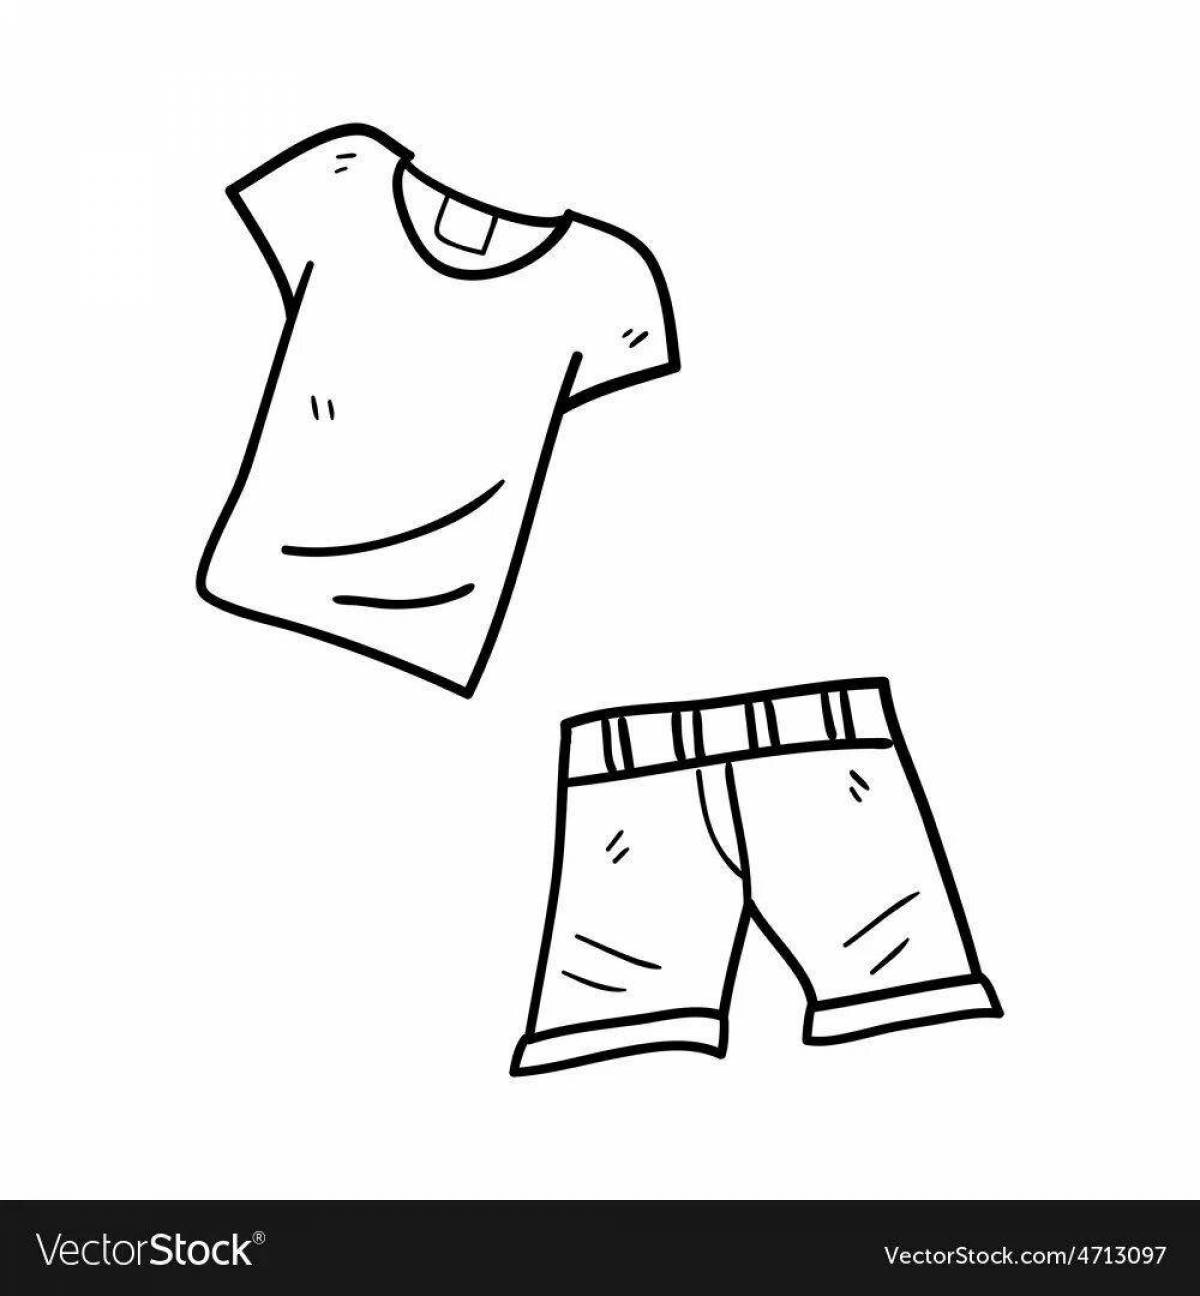 Animated coloring page of a boy in a t-shirt